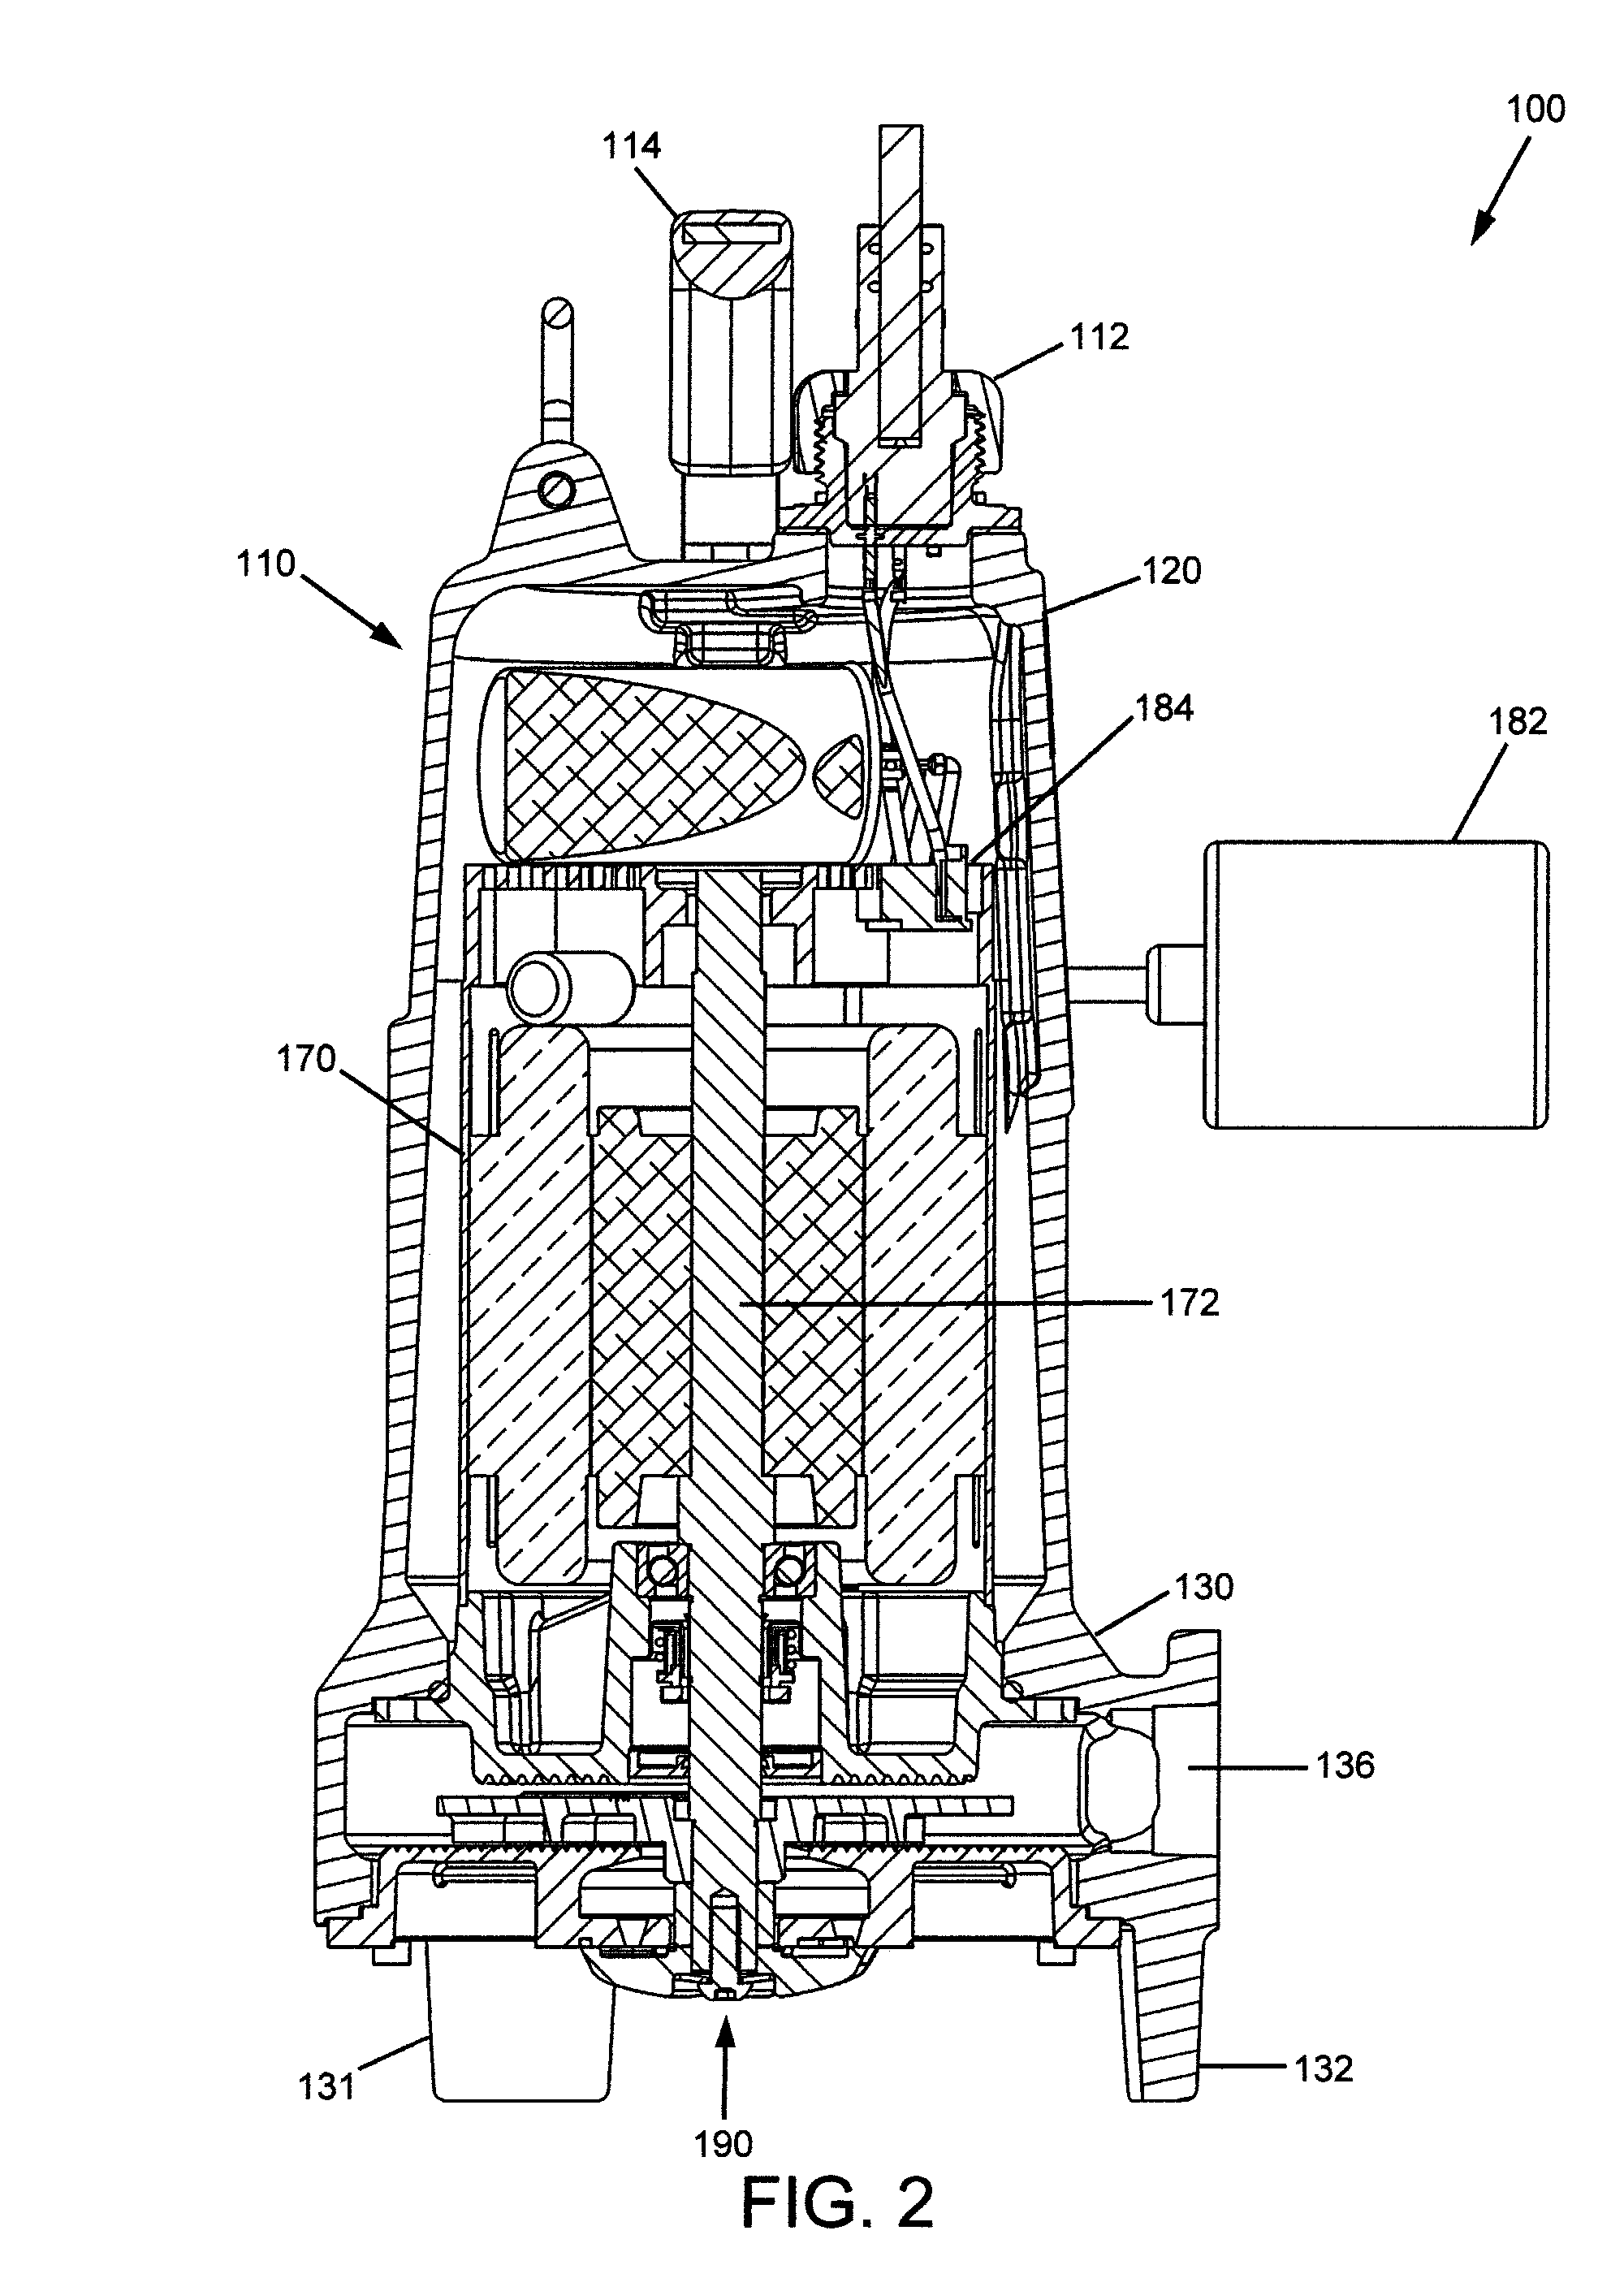 Cutter assembly for a grinder pump